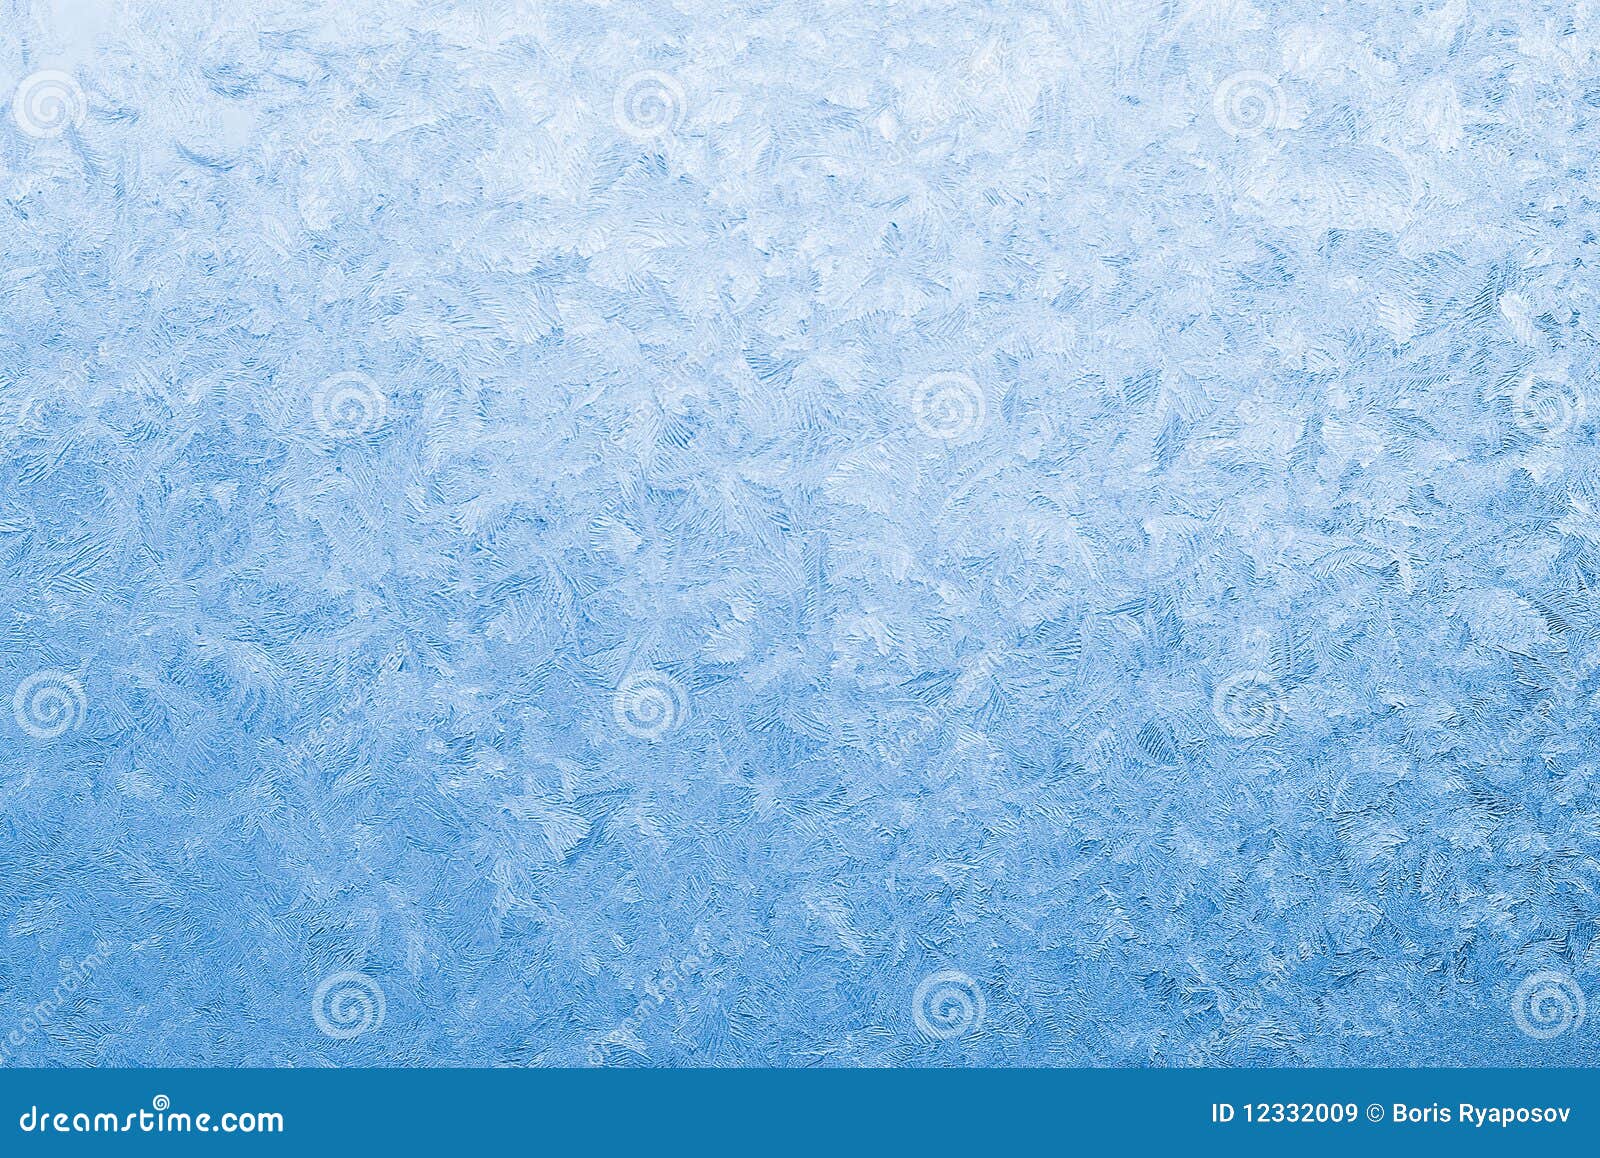 Light Blue Frozen Window Glass Royalty Free Stock Images  Image 